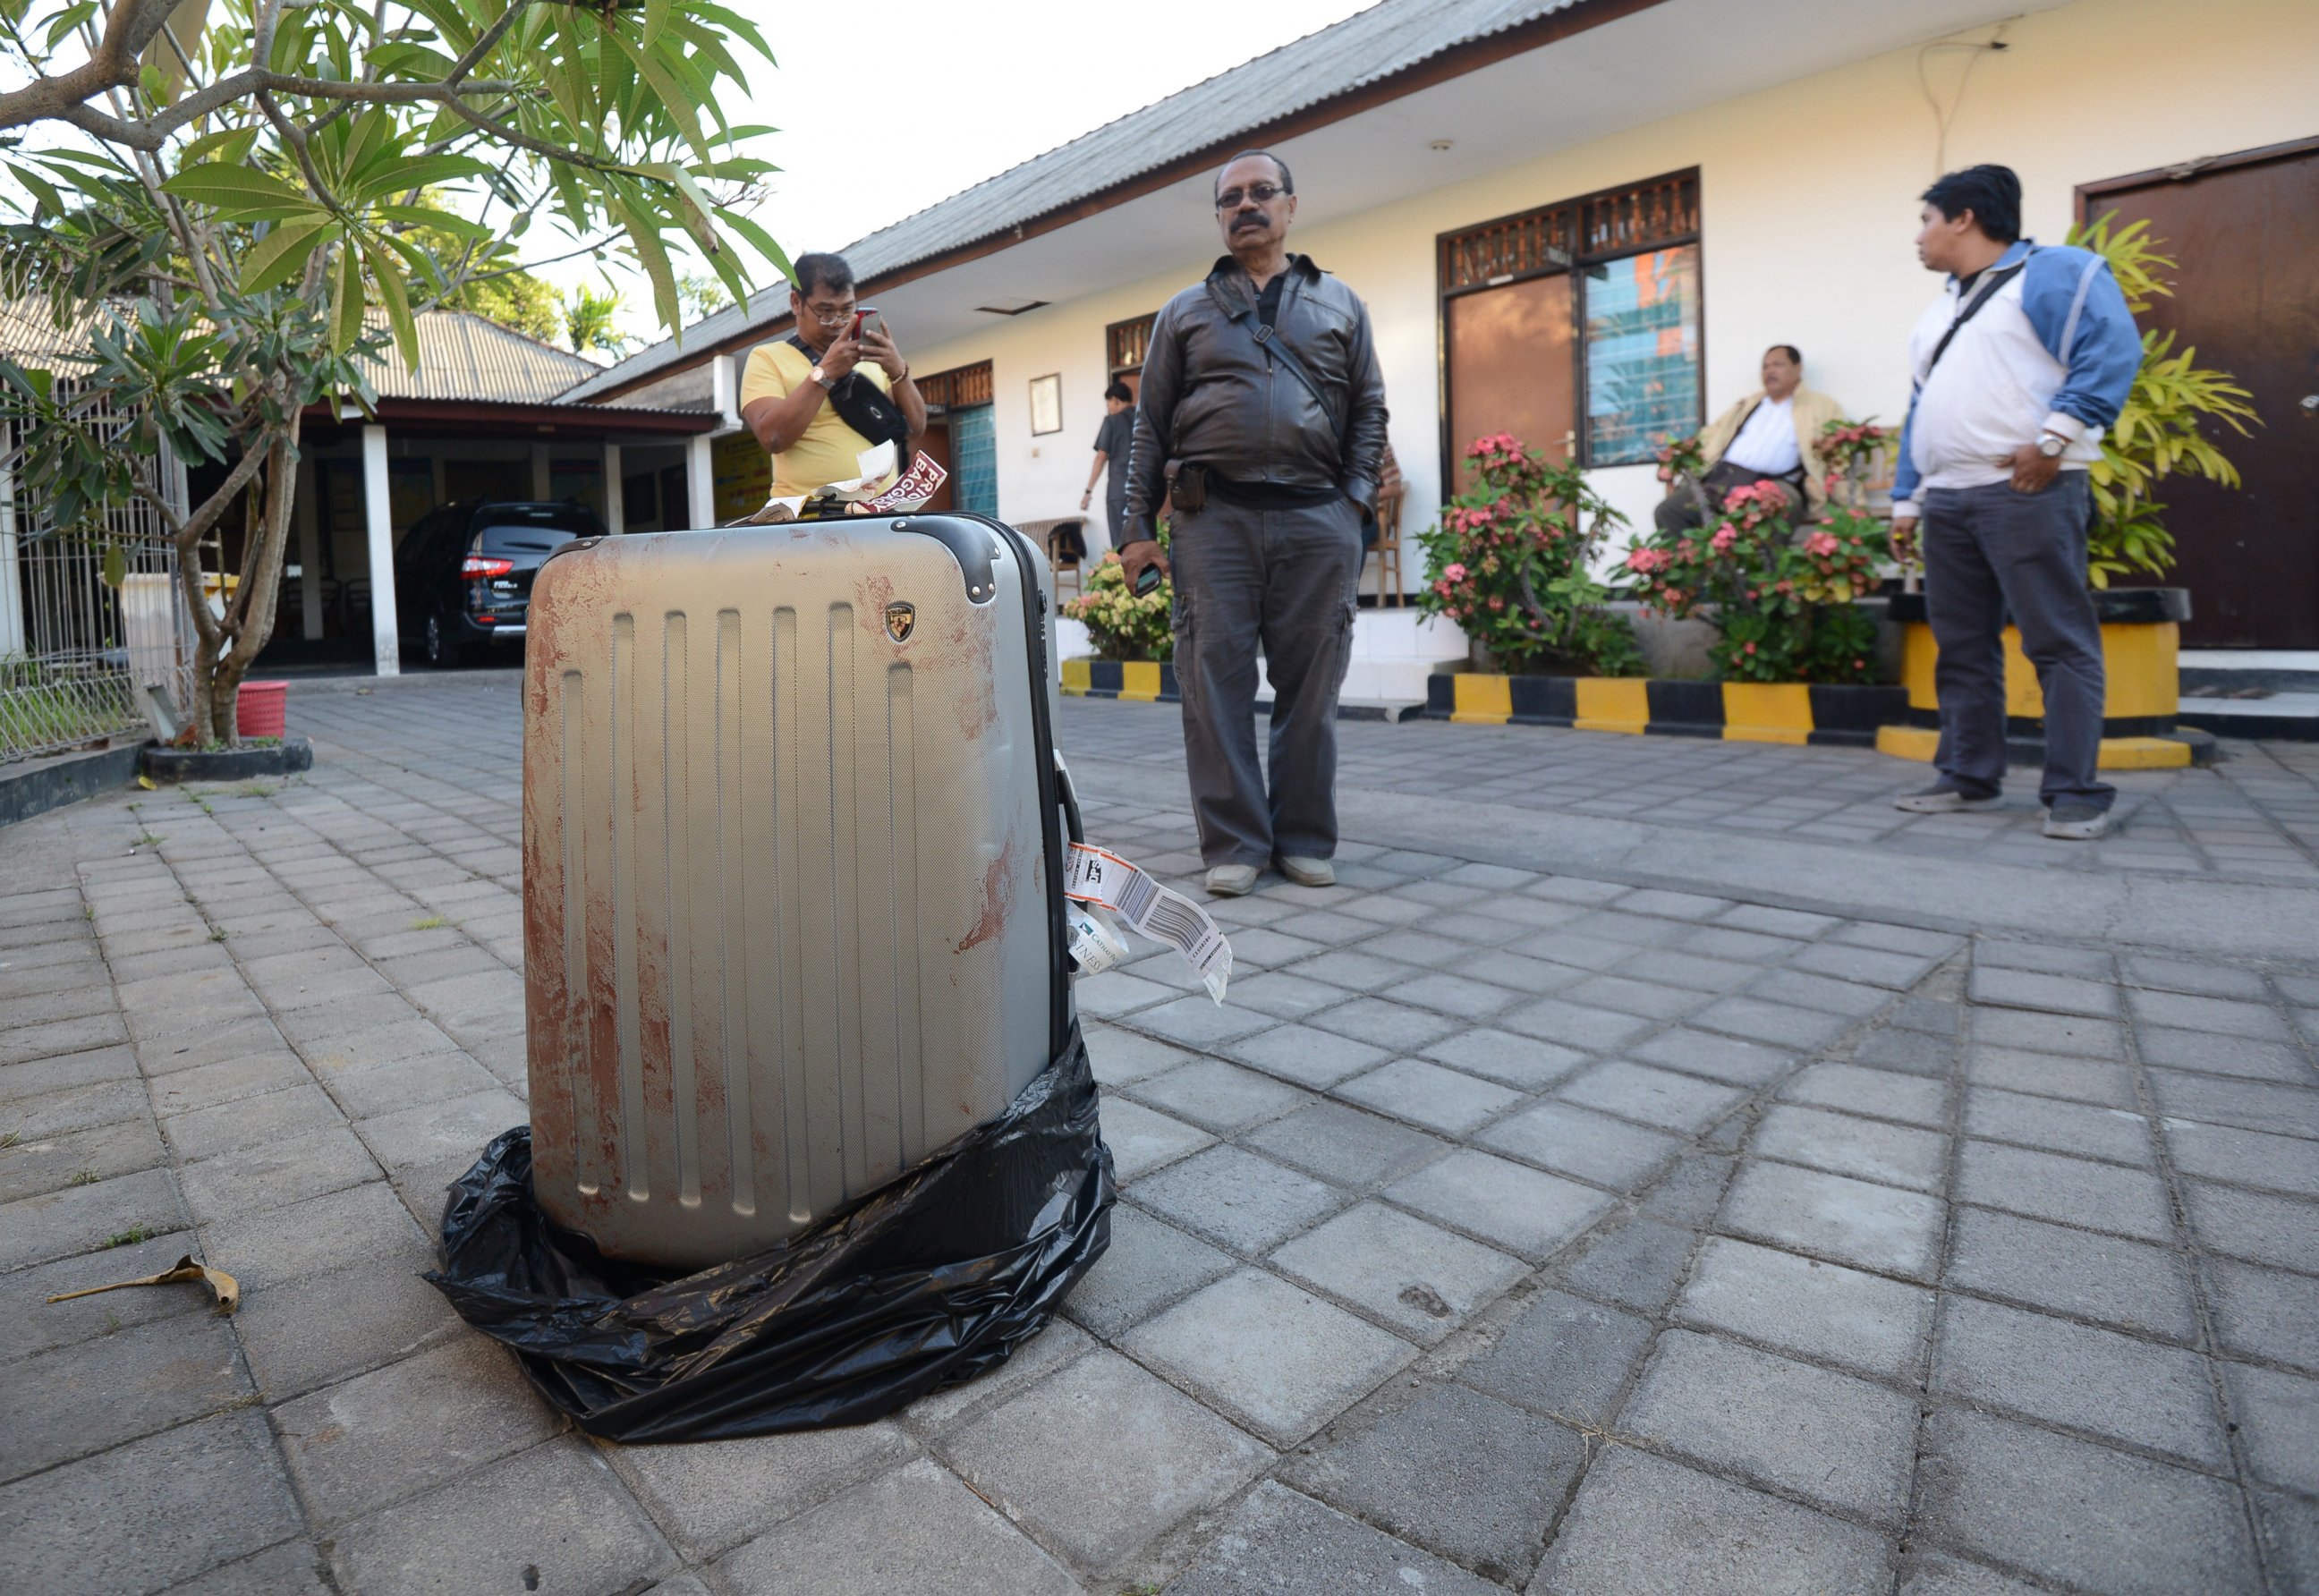 PHOTO: A US tourist's battered body has been found in a suitcase, seen here, at the exclusive hotel on Indonesia's resort island of Bali, on Aug. 12, 2014.